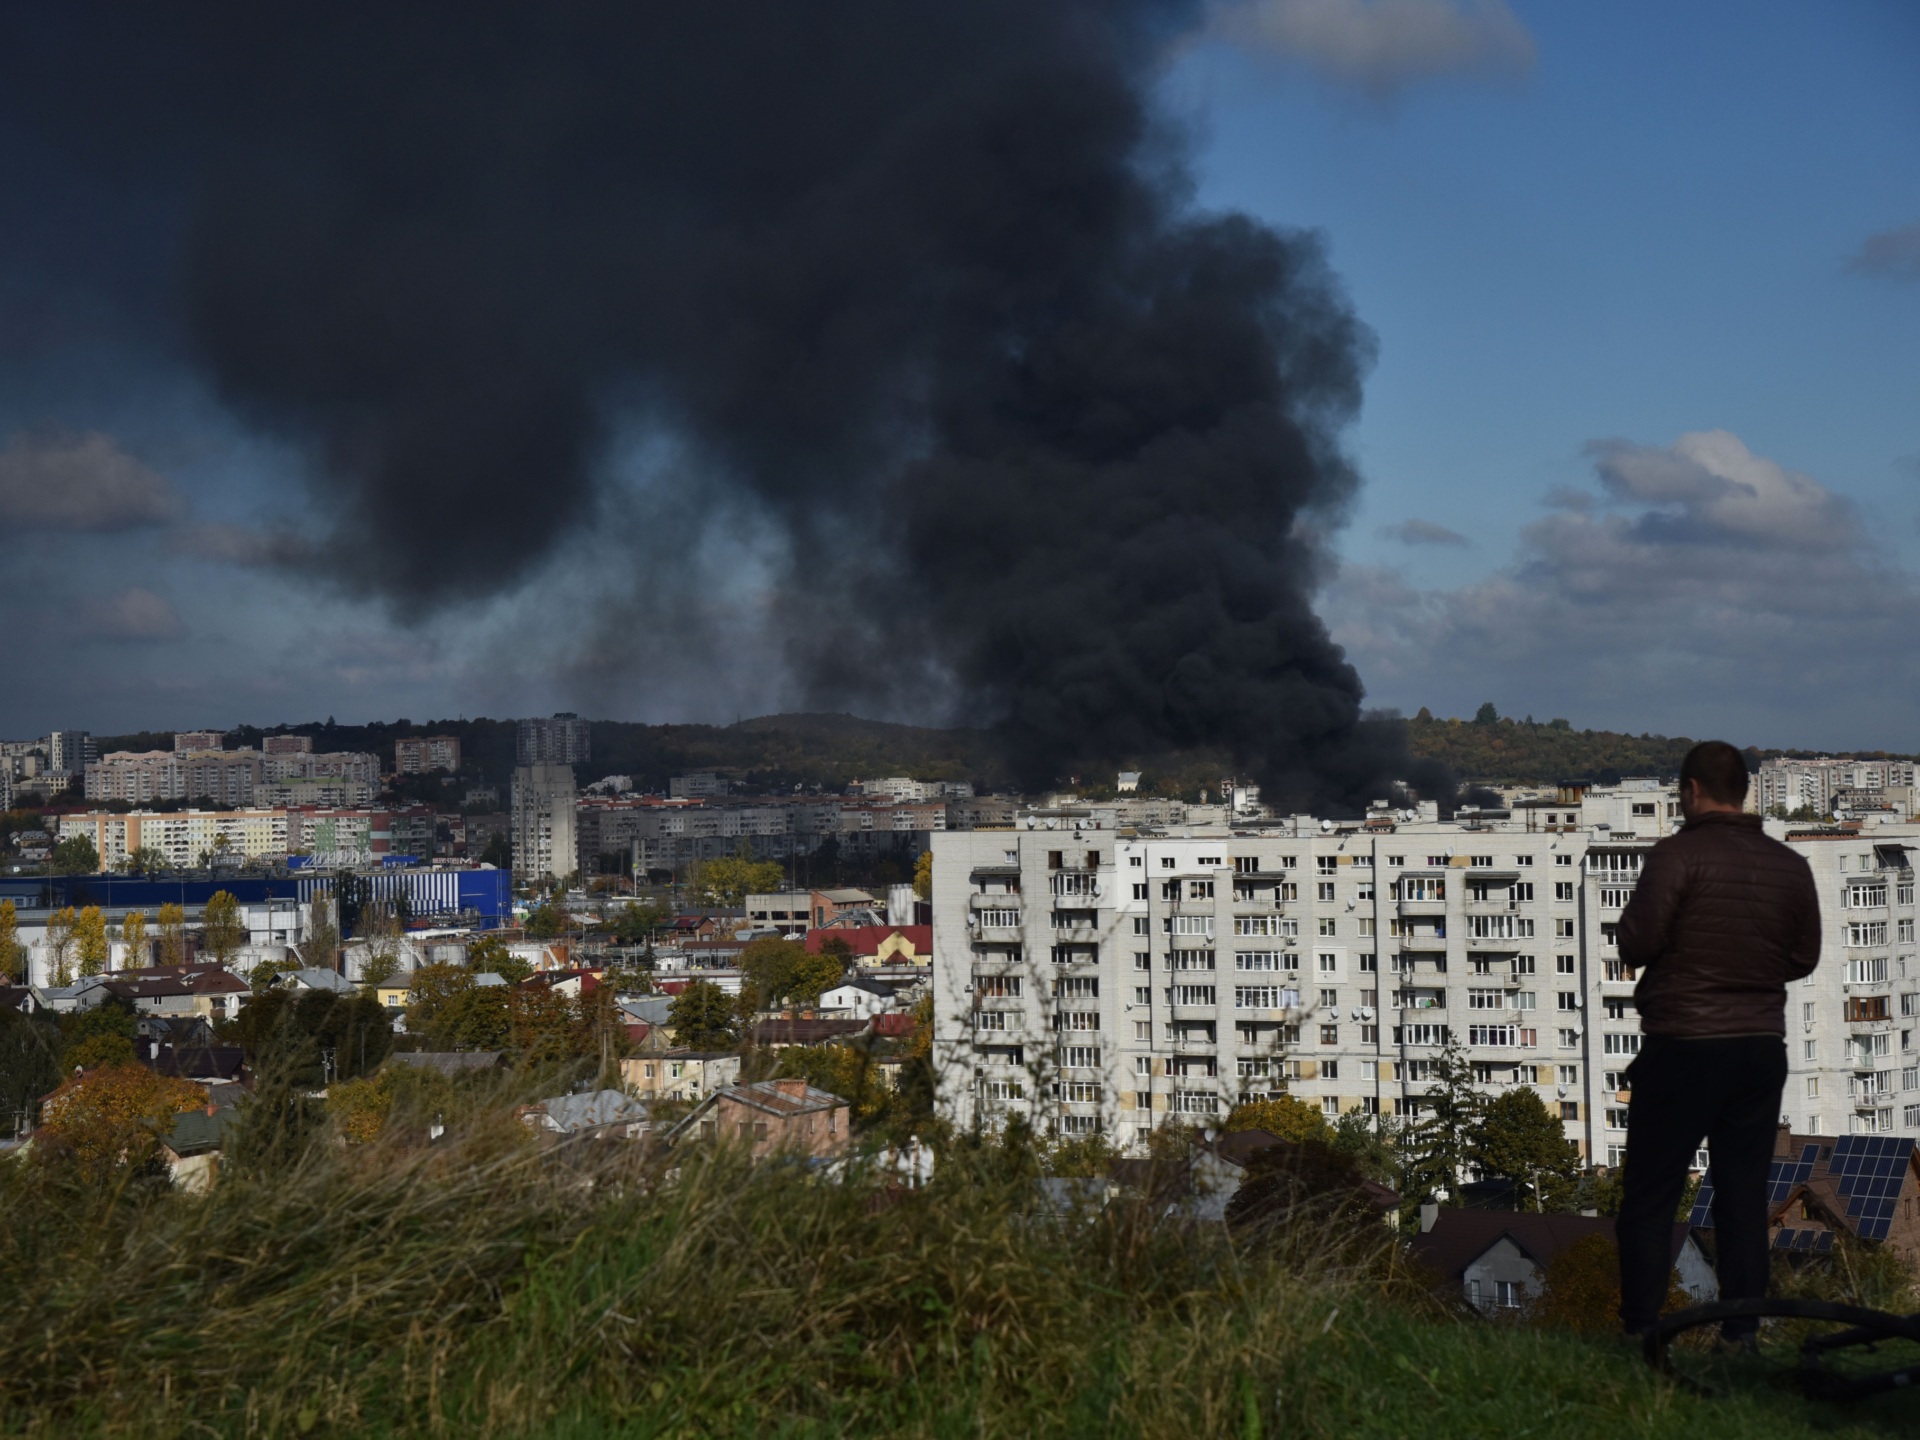 LVIV, UKRAINE - 2022/10/10: A man watches as smoke rises above the buildings after the Russian missile attack on the critical infrastructure of Lviv. Several powerful explosions were heard in Lviv and the region today. Russia launched 15 rockets in the Lviv region, some were shot down by air defense forces, the rest hit energy infrastructure facilities. Due to the rocket attack, Lviv was left without electricity, water and mobile communication. (Photo by Pavlo Palamarchuk/SOPA Images/LightRocket via Getty Images)